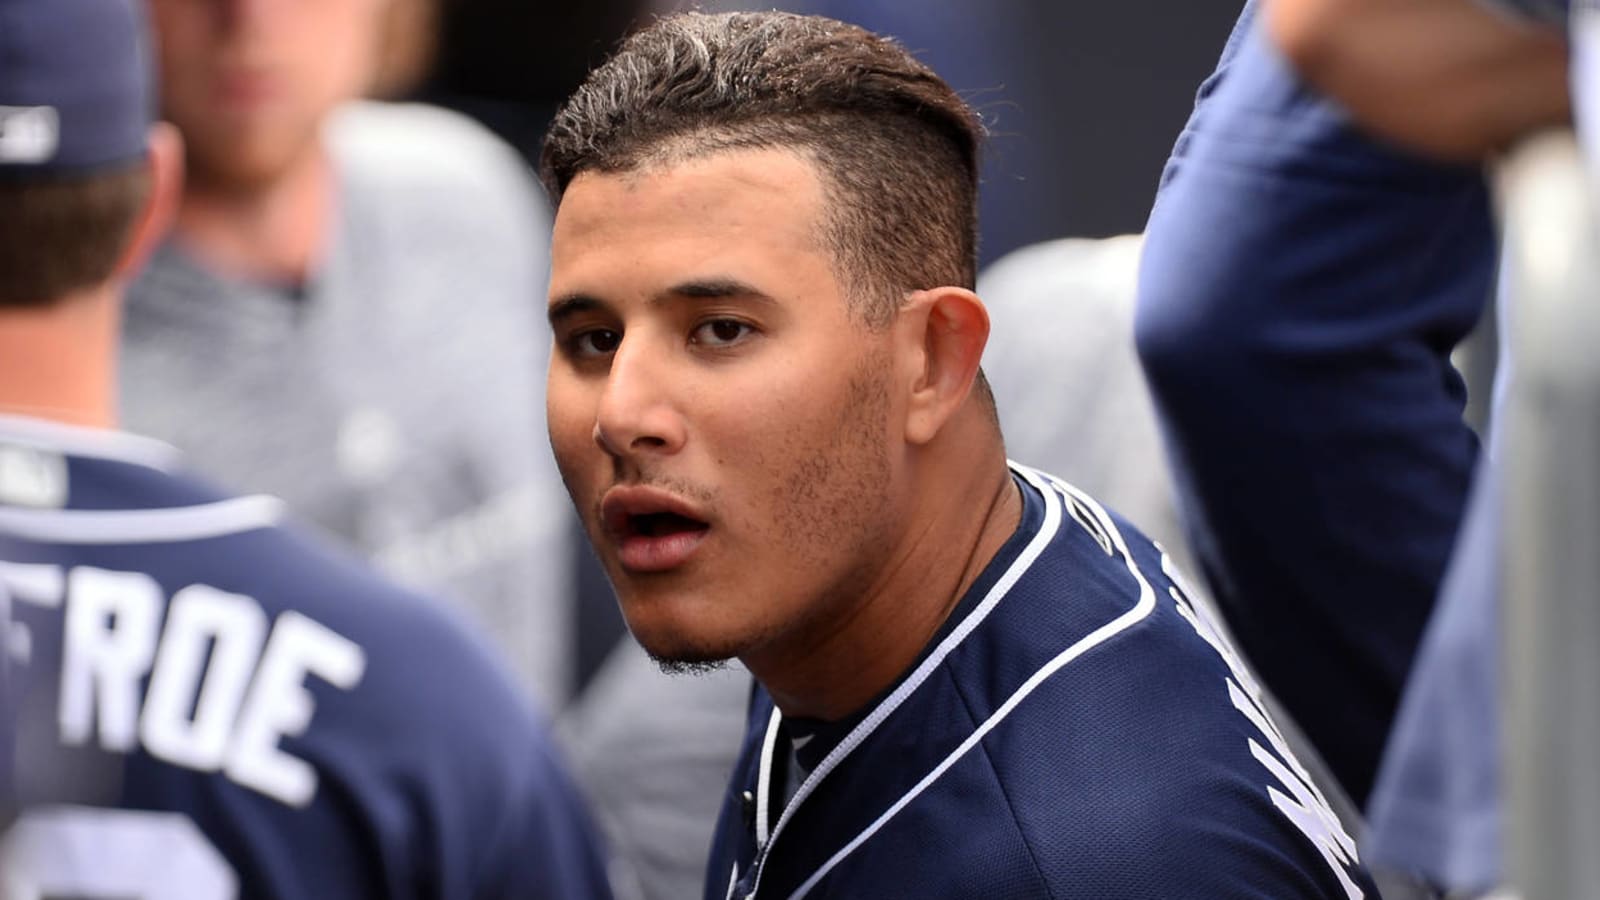 Manny Machado knows he’s seen as a 'villain' after doing 'some dumb things'